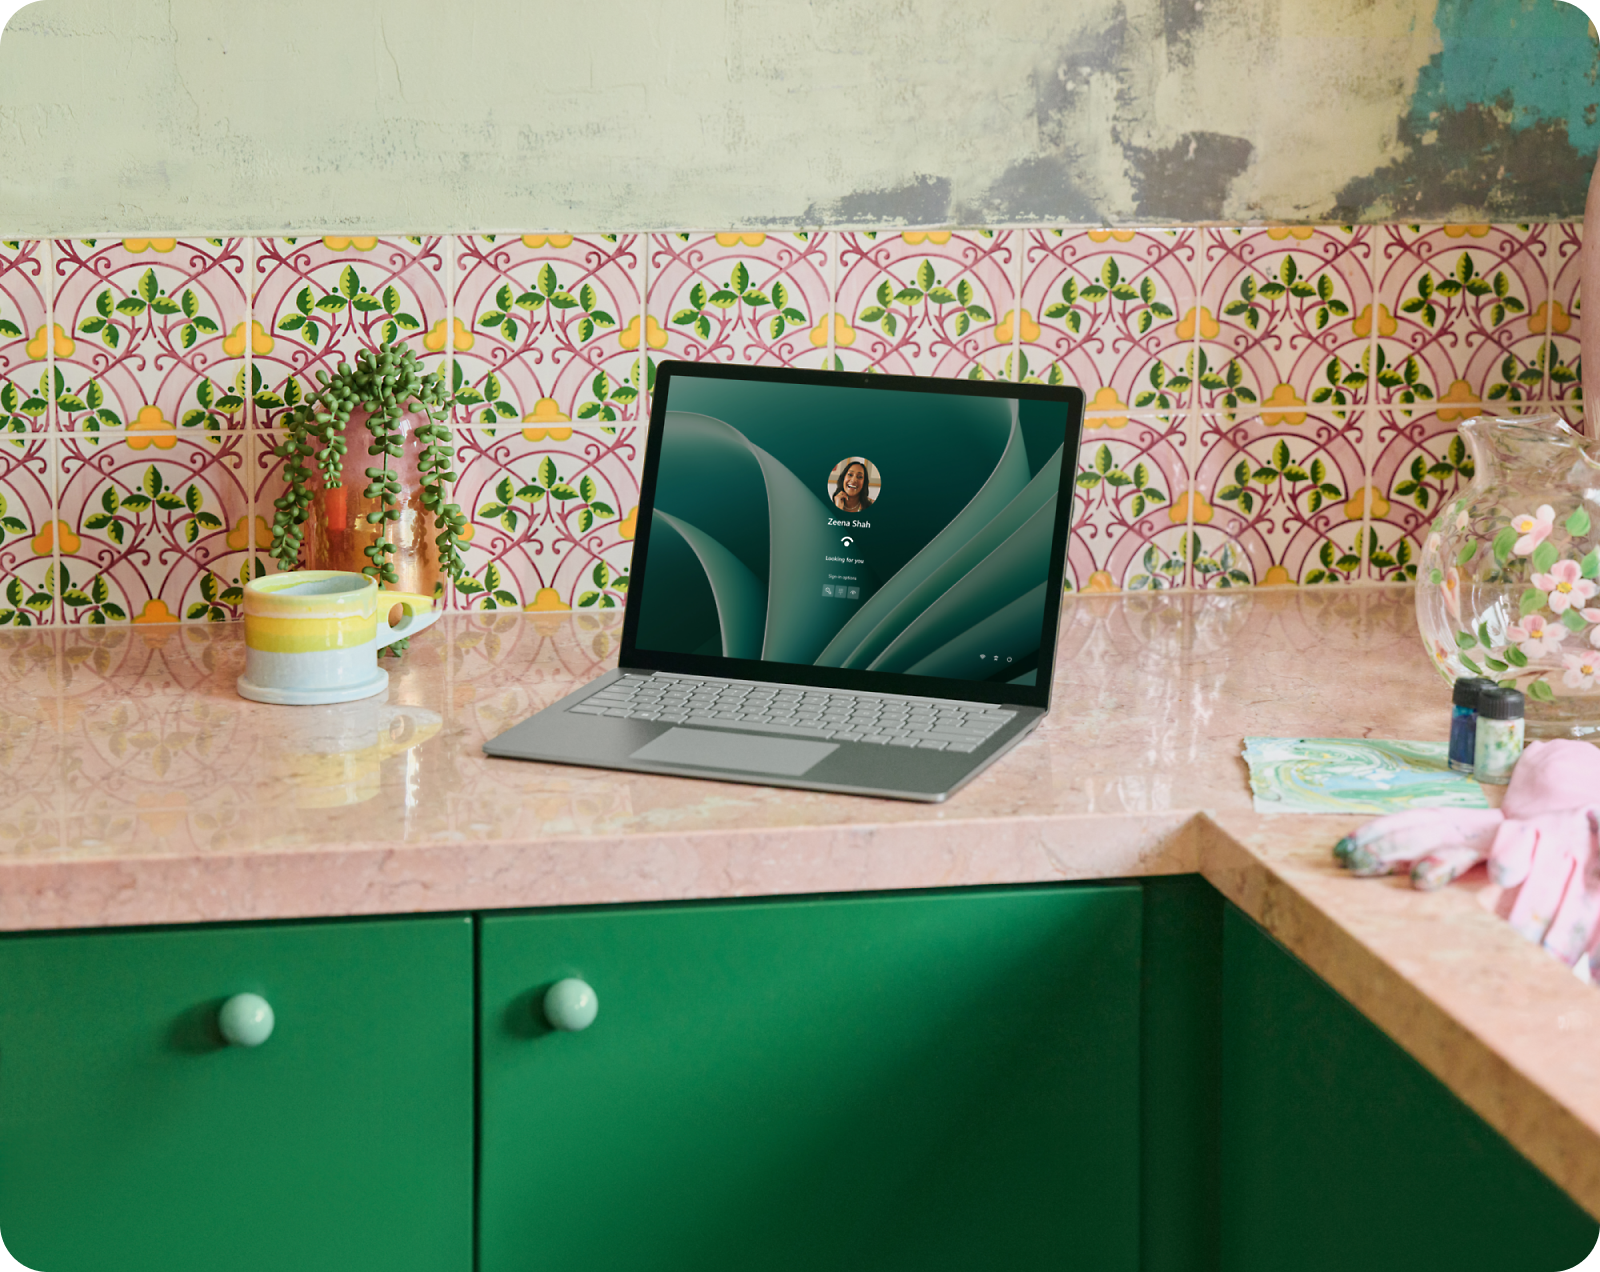 A laptop with a login screen sits on a pink marble kitchen counter, surrounded by colorful patterned tiles